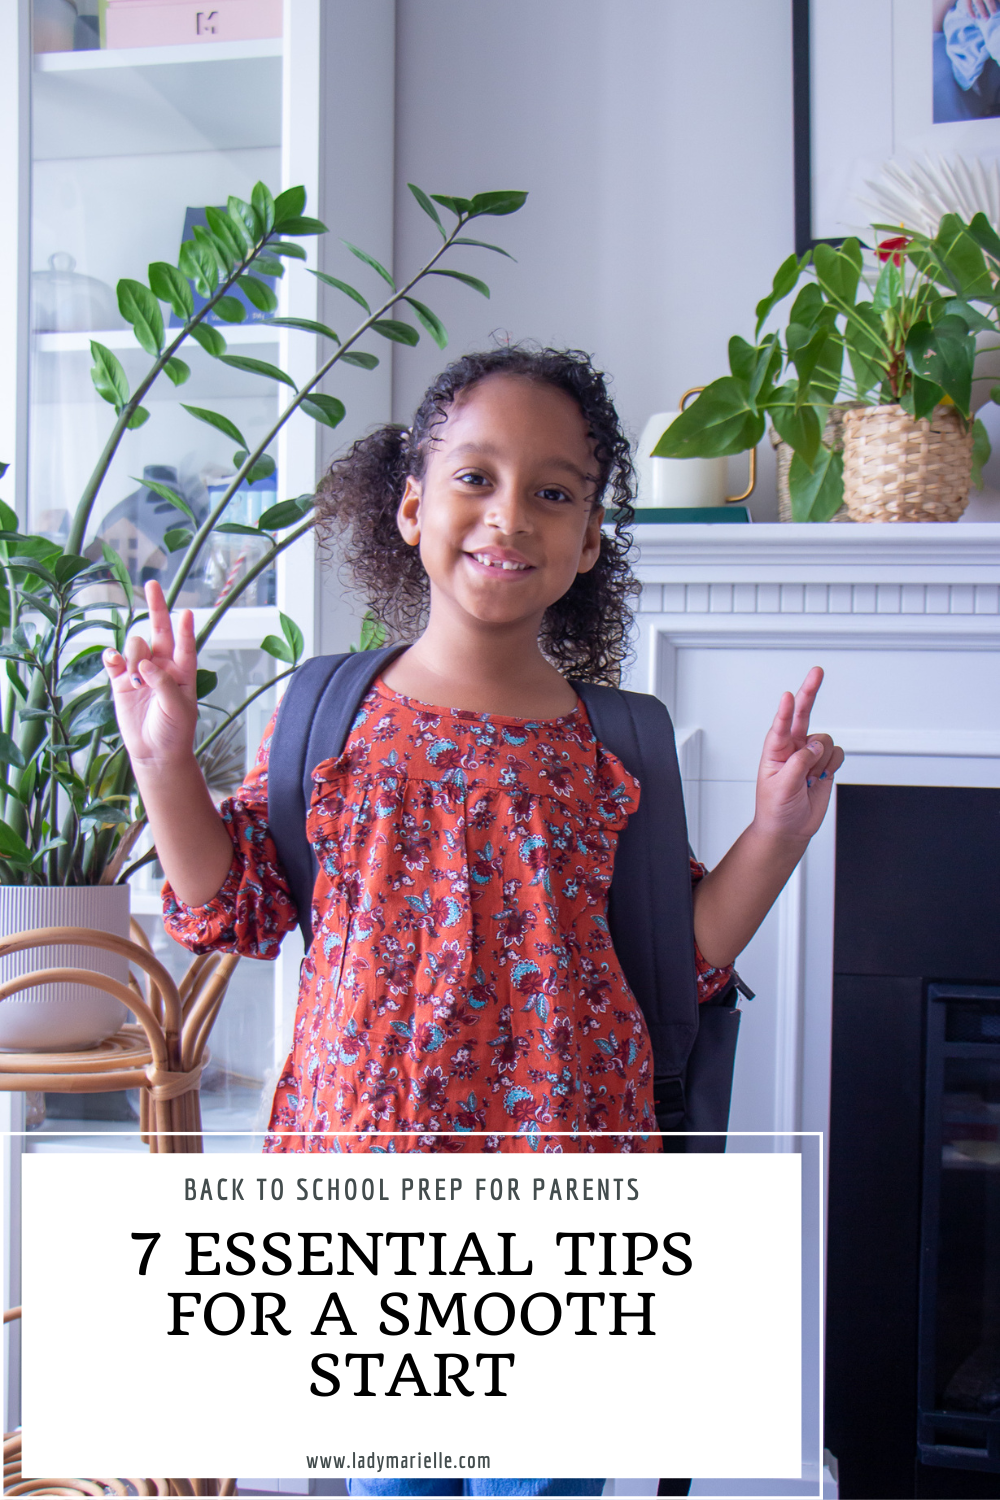 Back to School Prep for Parents: 7 Essential Tips for a Smooth Start